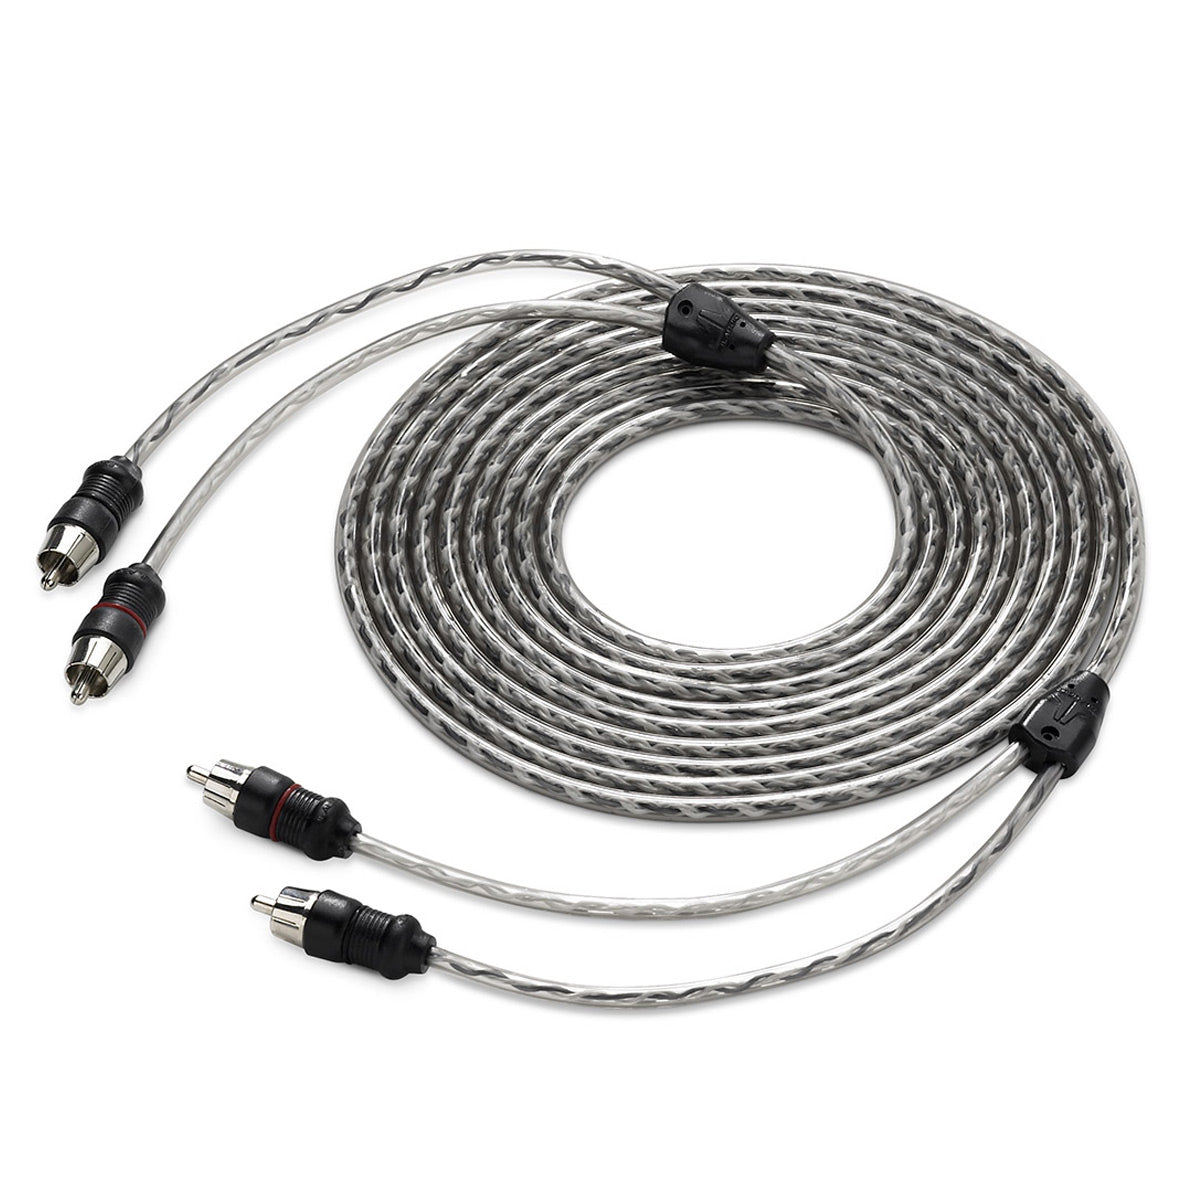 JL Audio 2-Channel Core RCA Male to RCA Male Cable - 12 ft. (3.65m)